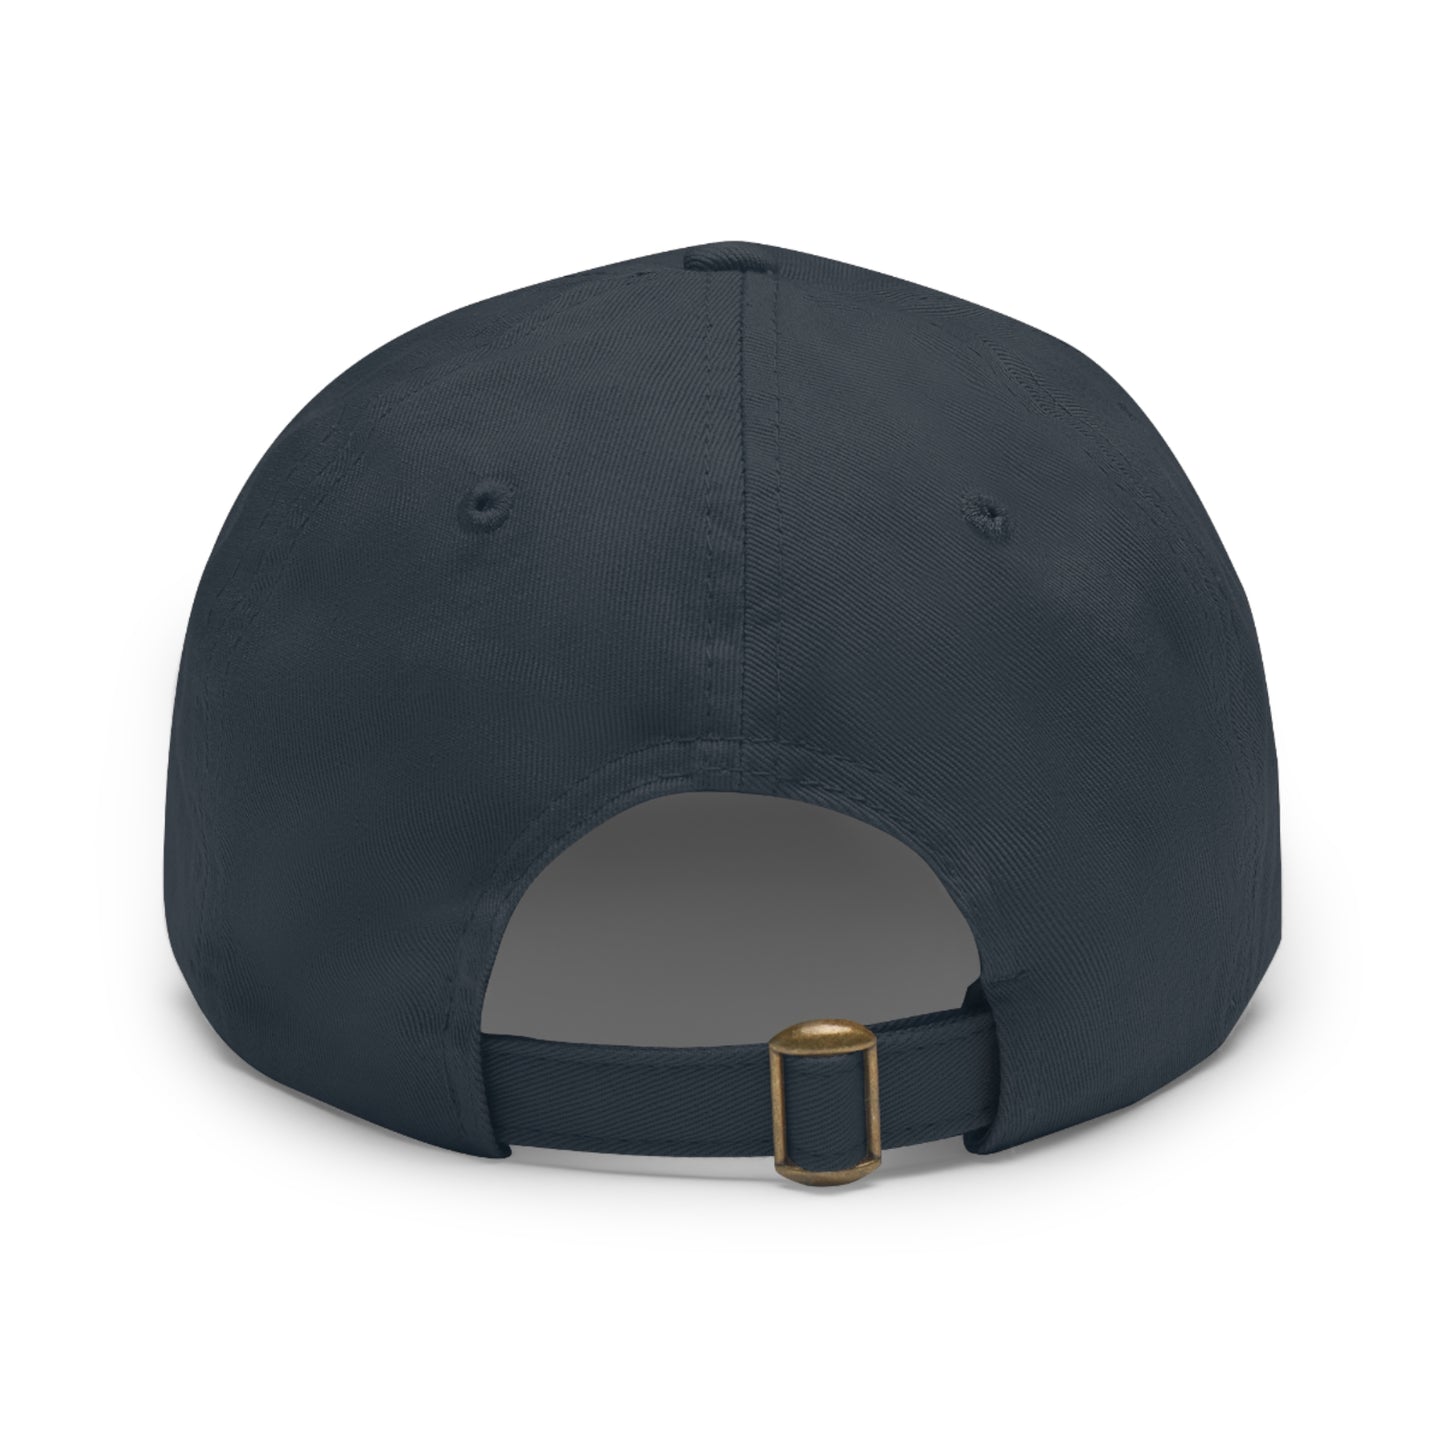 Hat with Round Leather Patch - Great South Bay Bridge